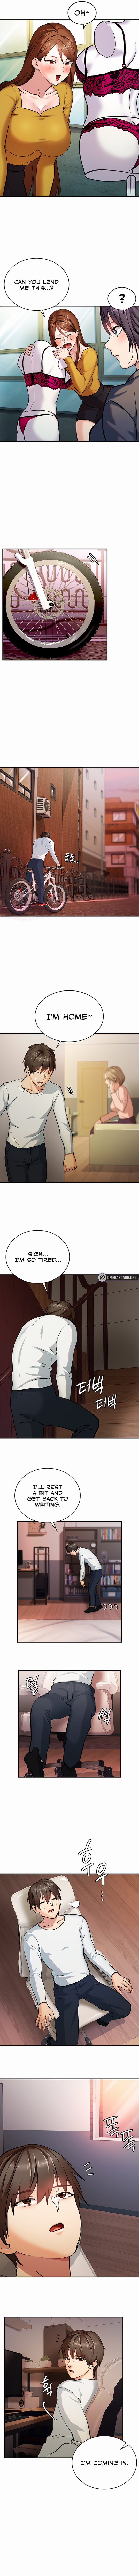 The Girl Next Door - Chapter 1 Page 14